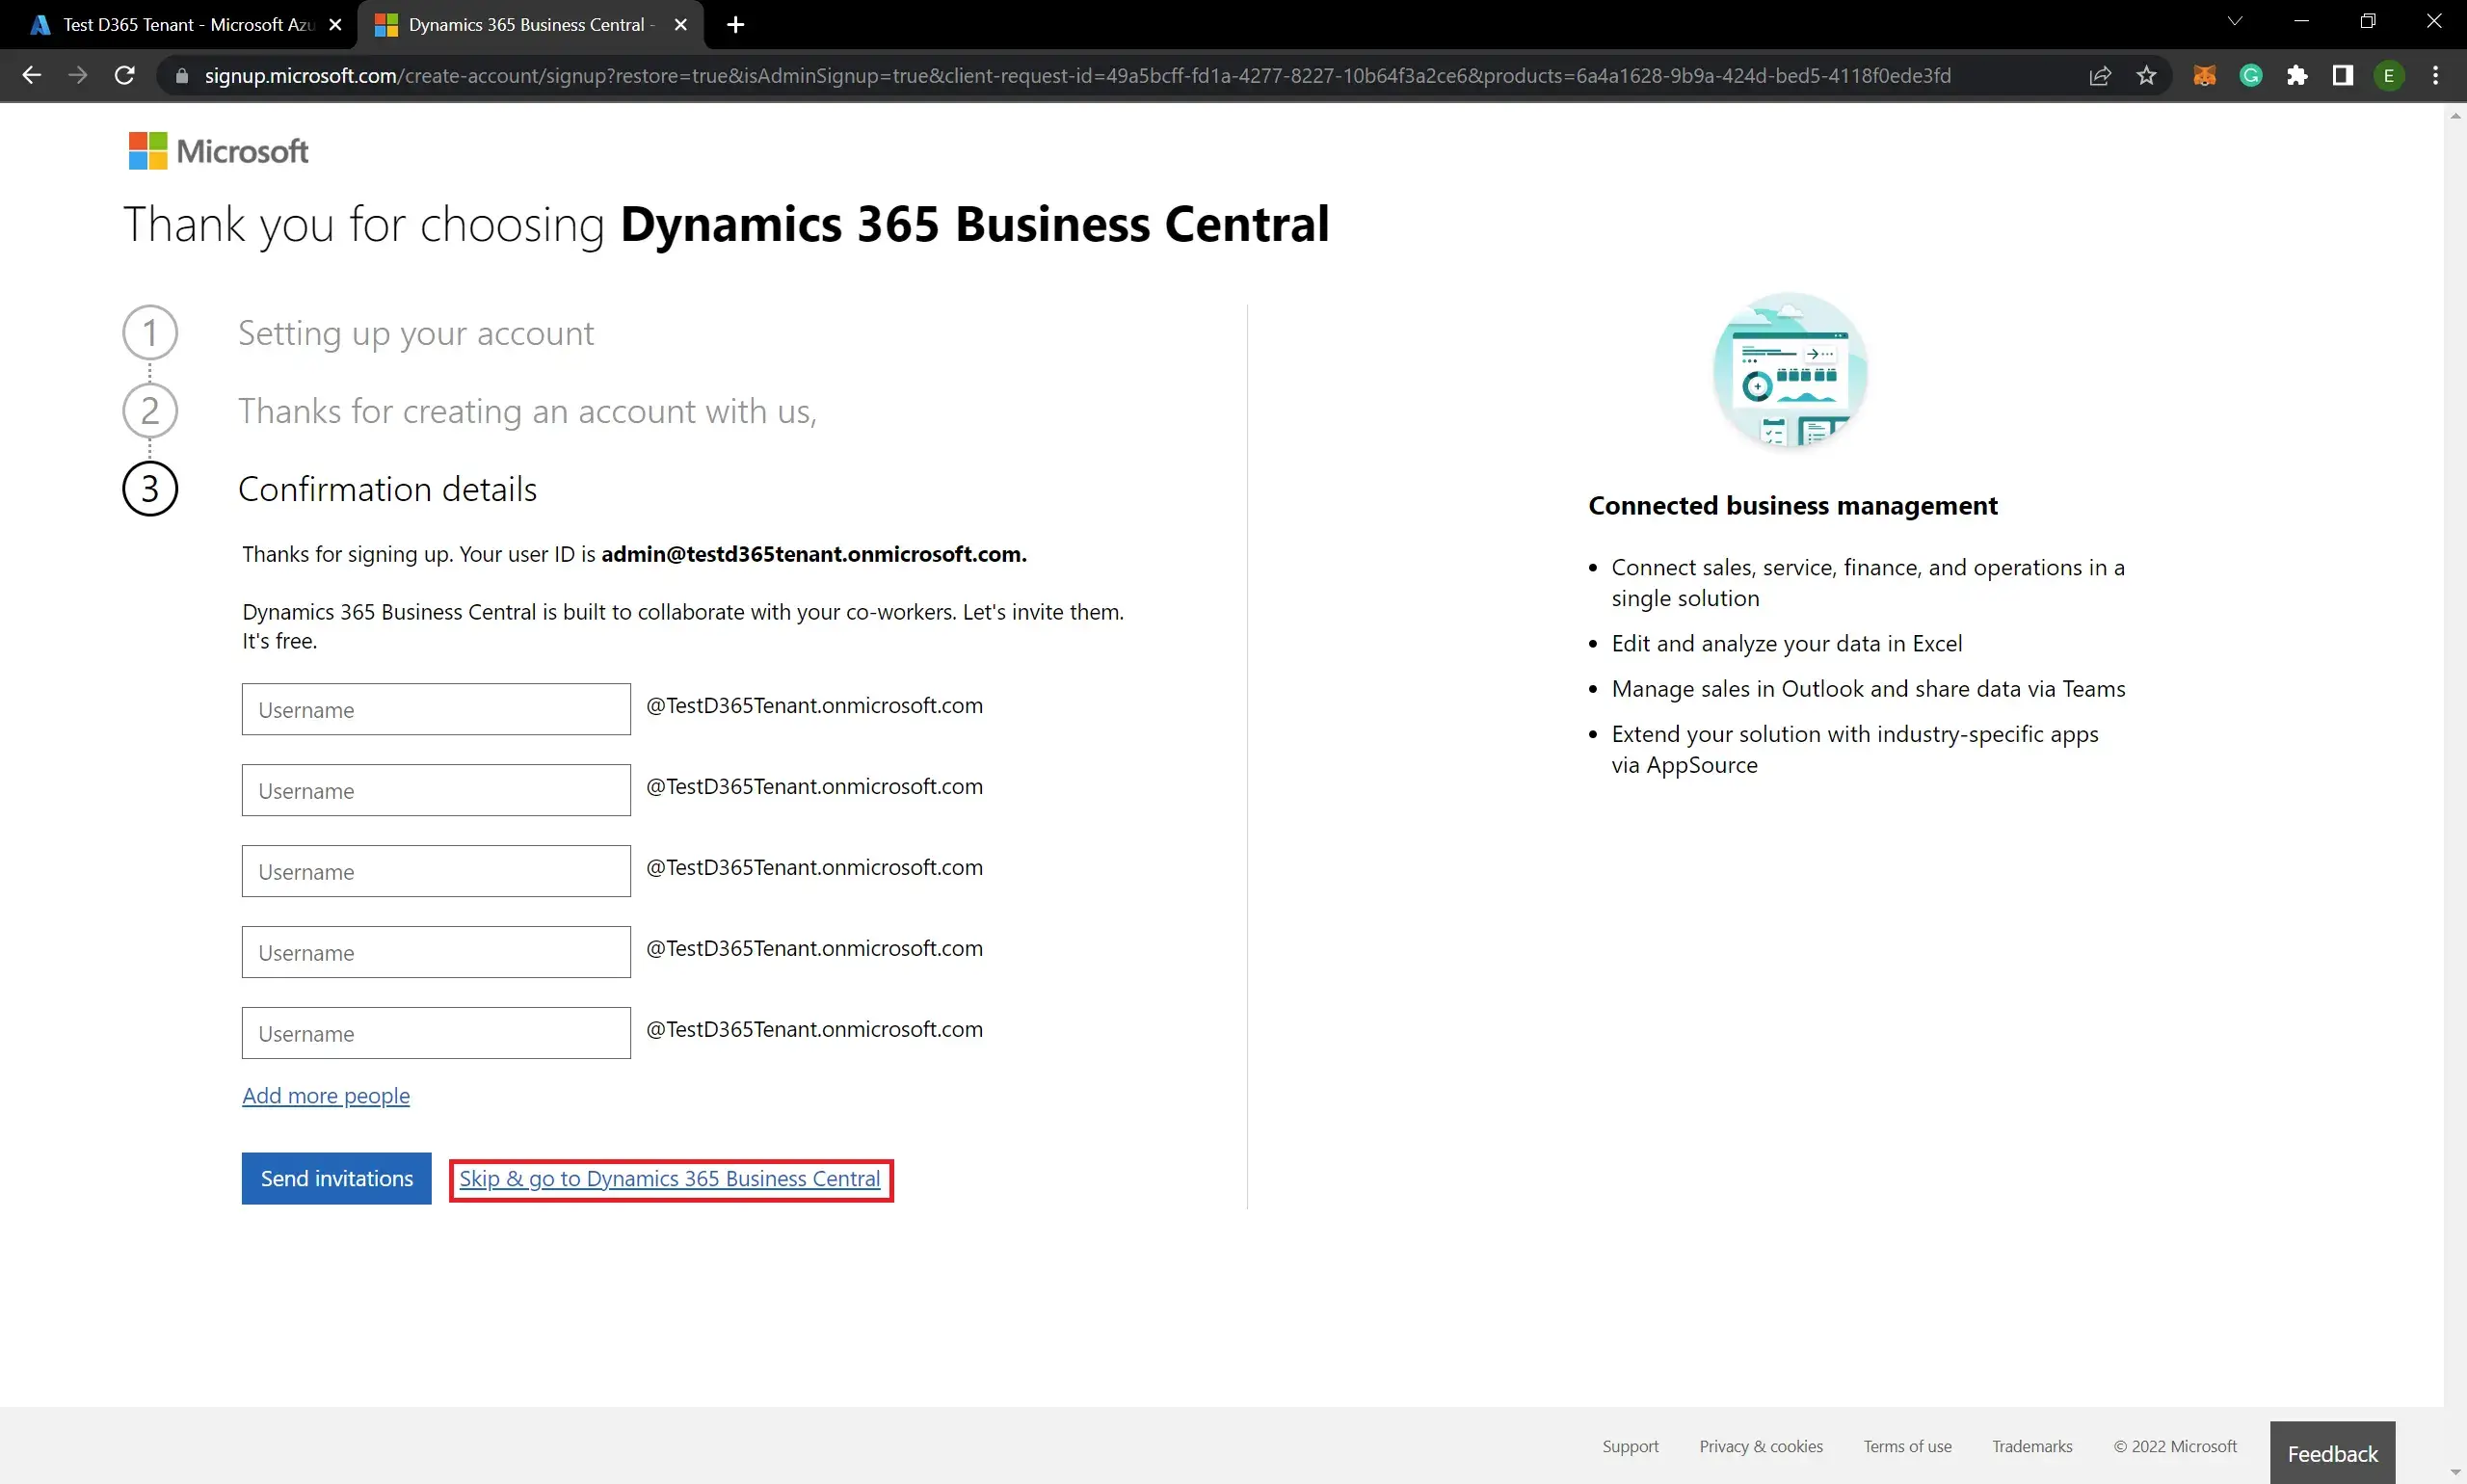 How to invite other user accounts to access Dynamics D365 BC trail account